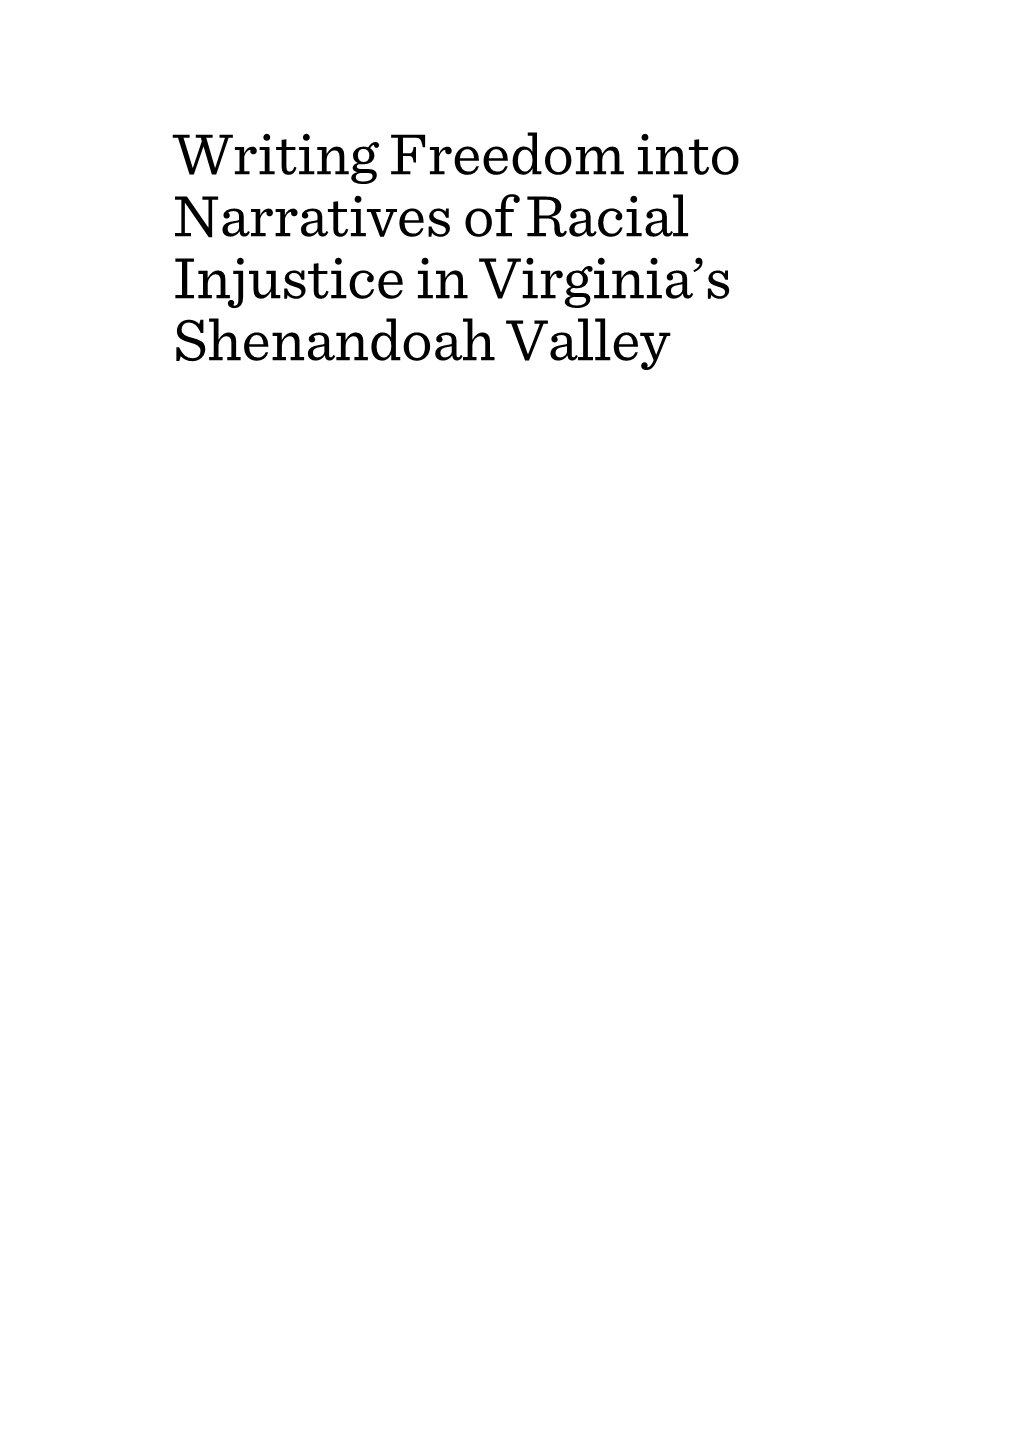 Writing Freedom Into Narratives of Racial Injustice in Virginia's